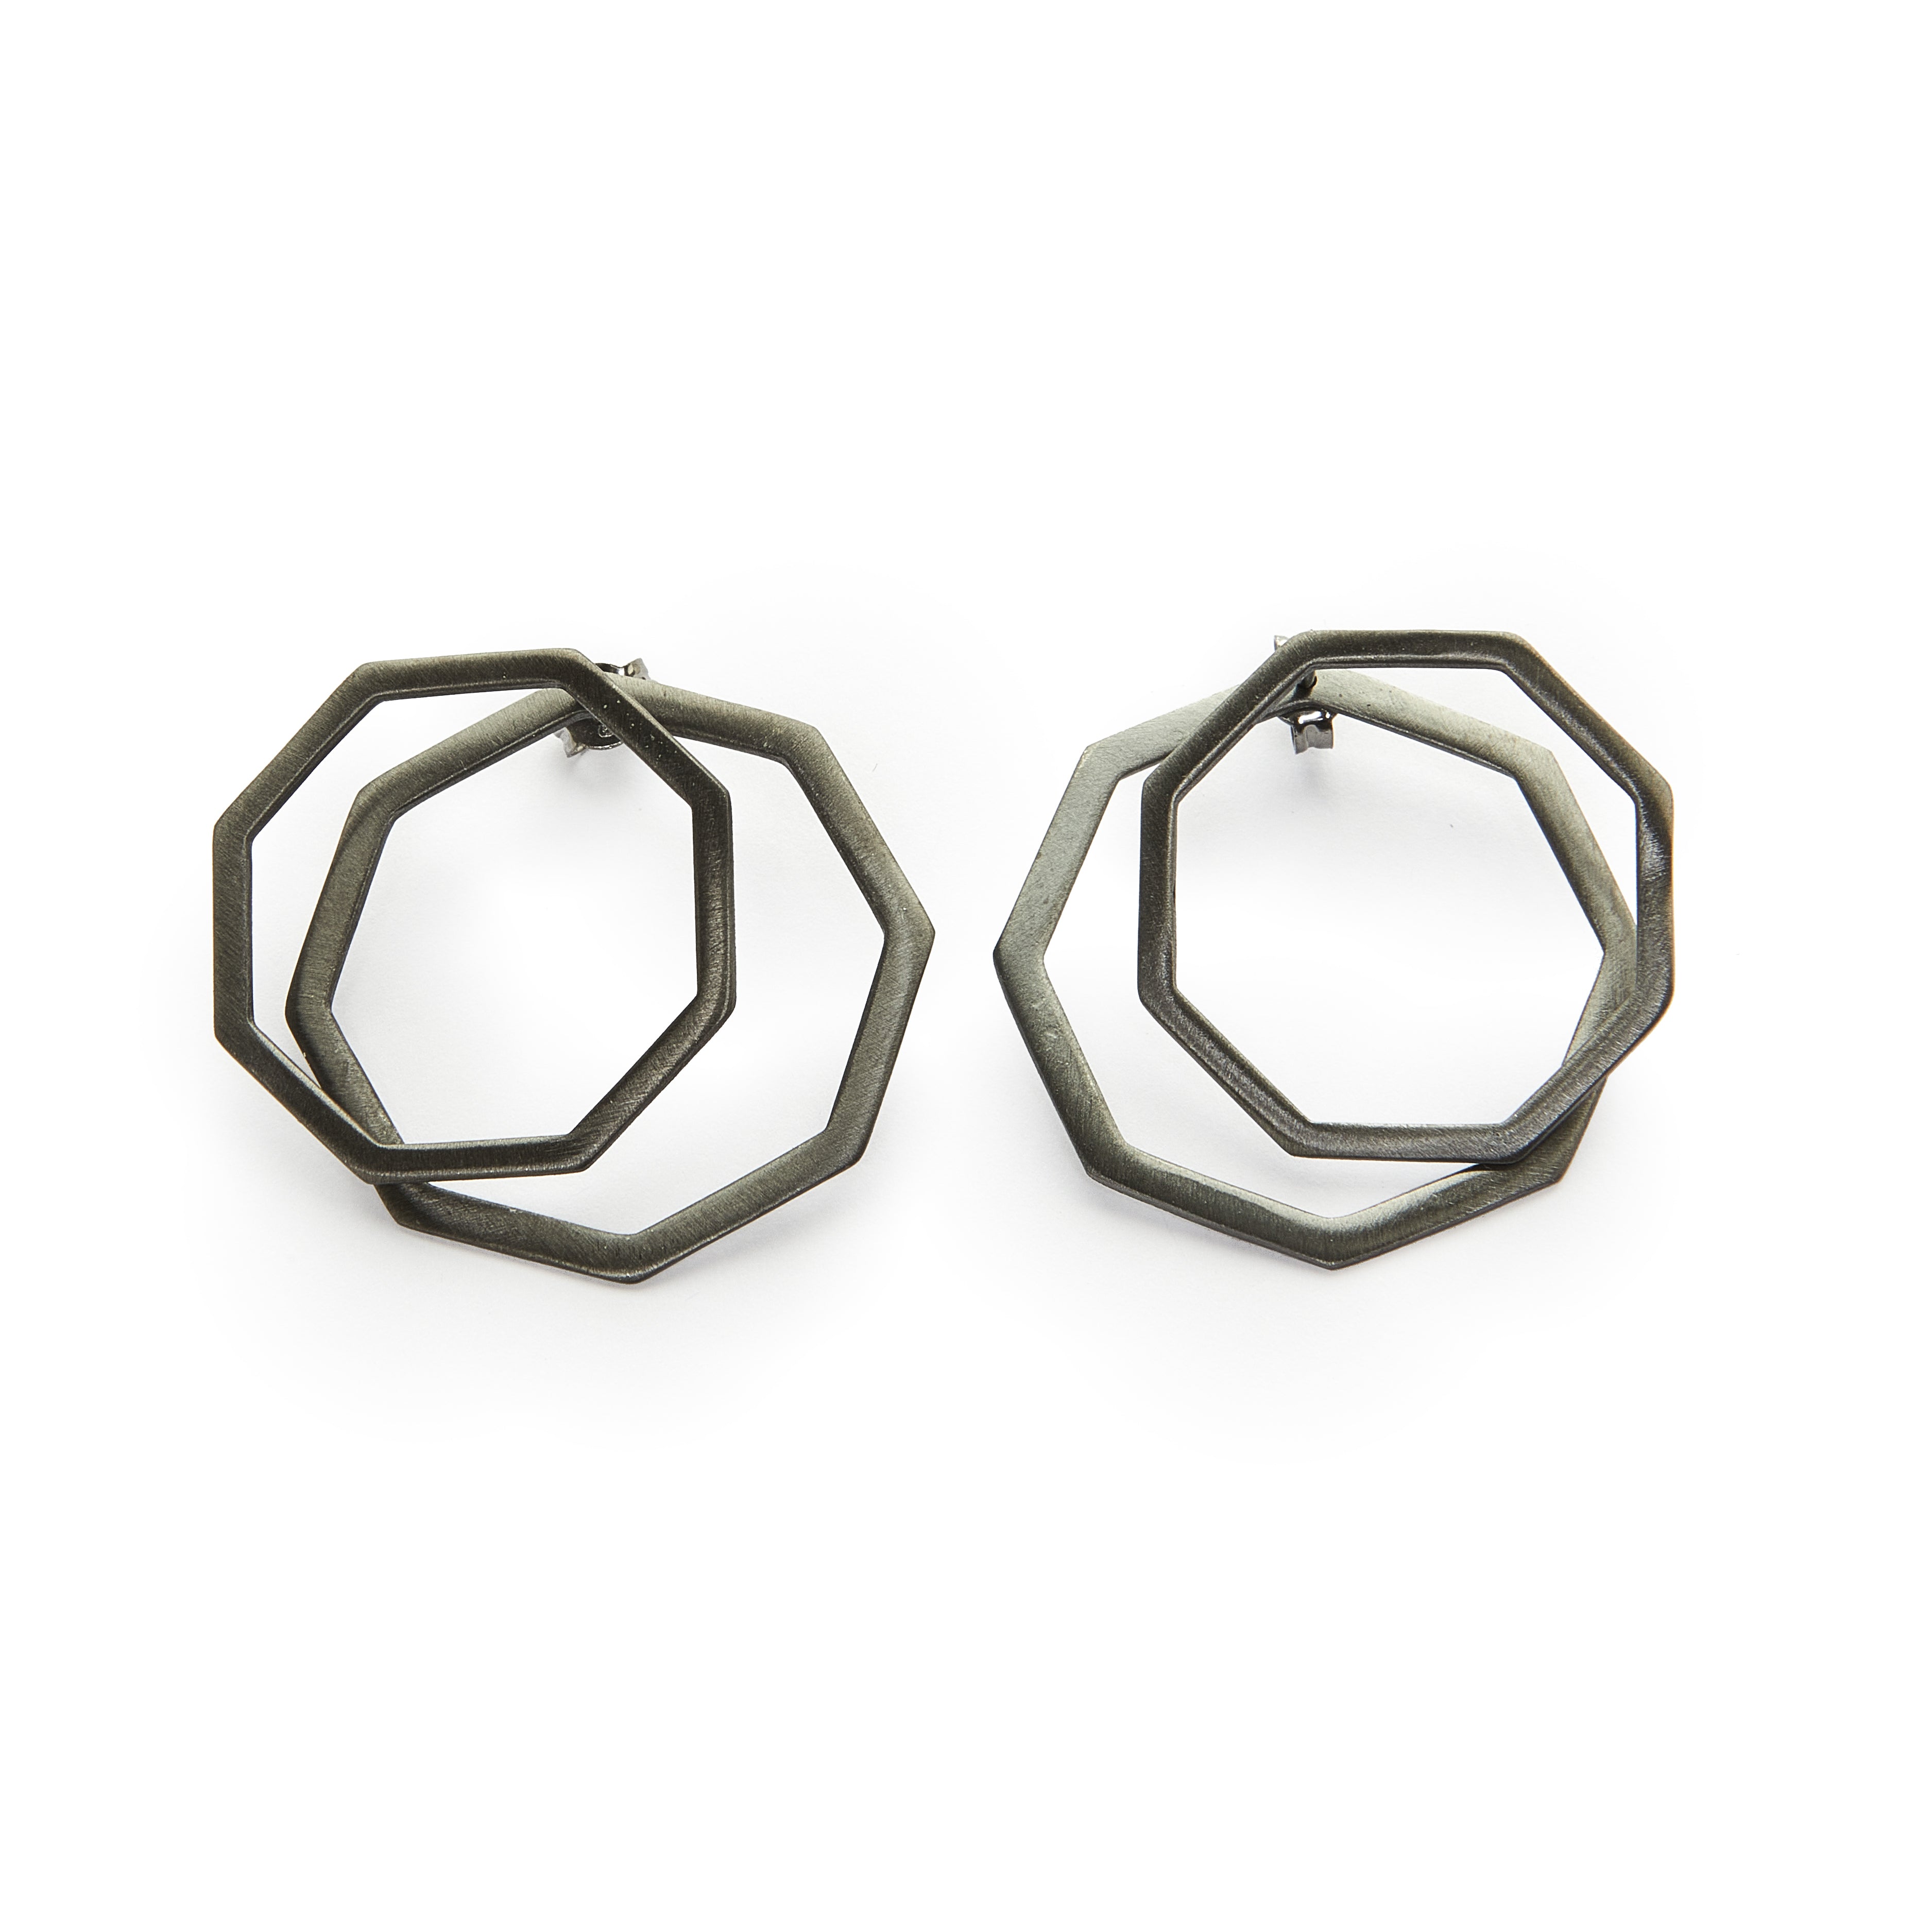 Polygon ear jacket earrings in silver 925 or brass, gold-plated or platinum-plated that can be worn in more than one configuration. Wear these two dimensional front and back earrings in the front of the ear for a classy statement, wear just the front geometric stud earrings for a minimal look or add the back earrings for a special and unique look